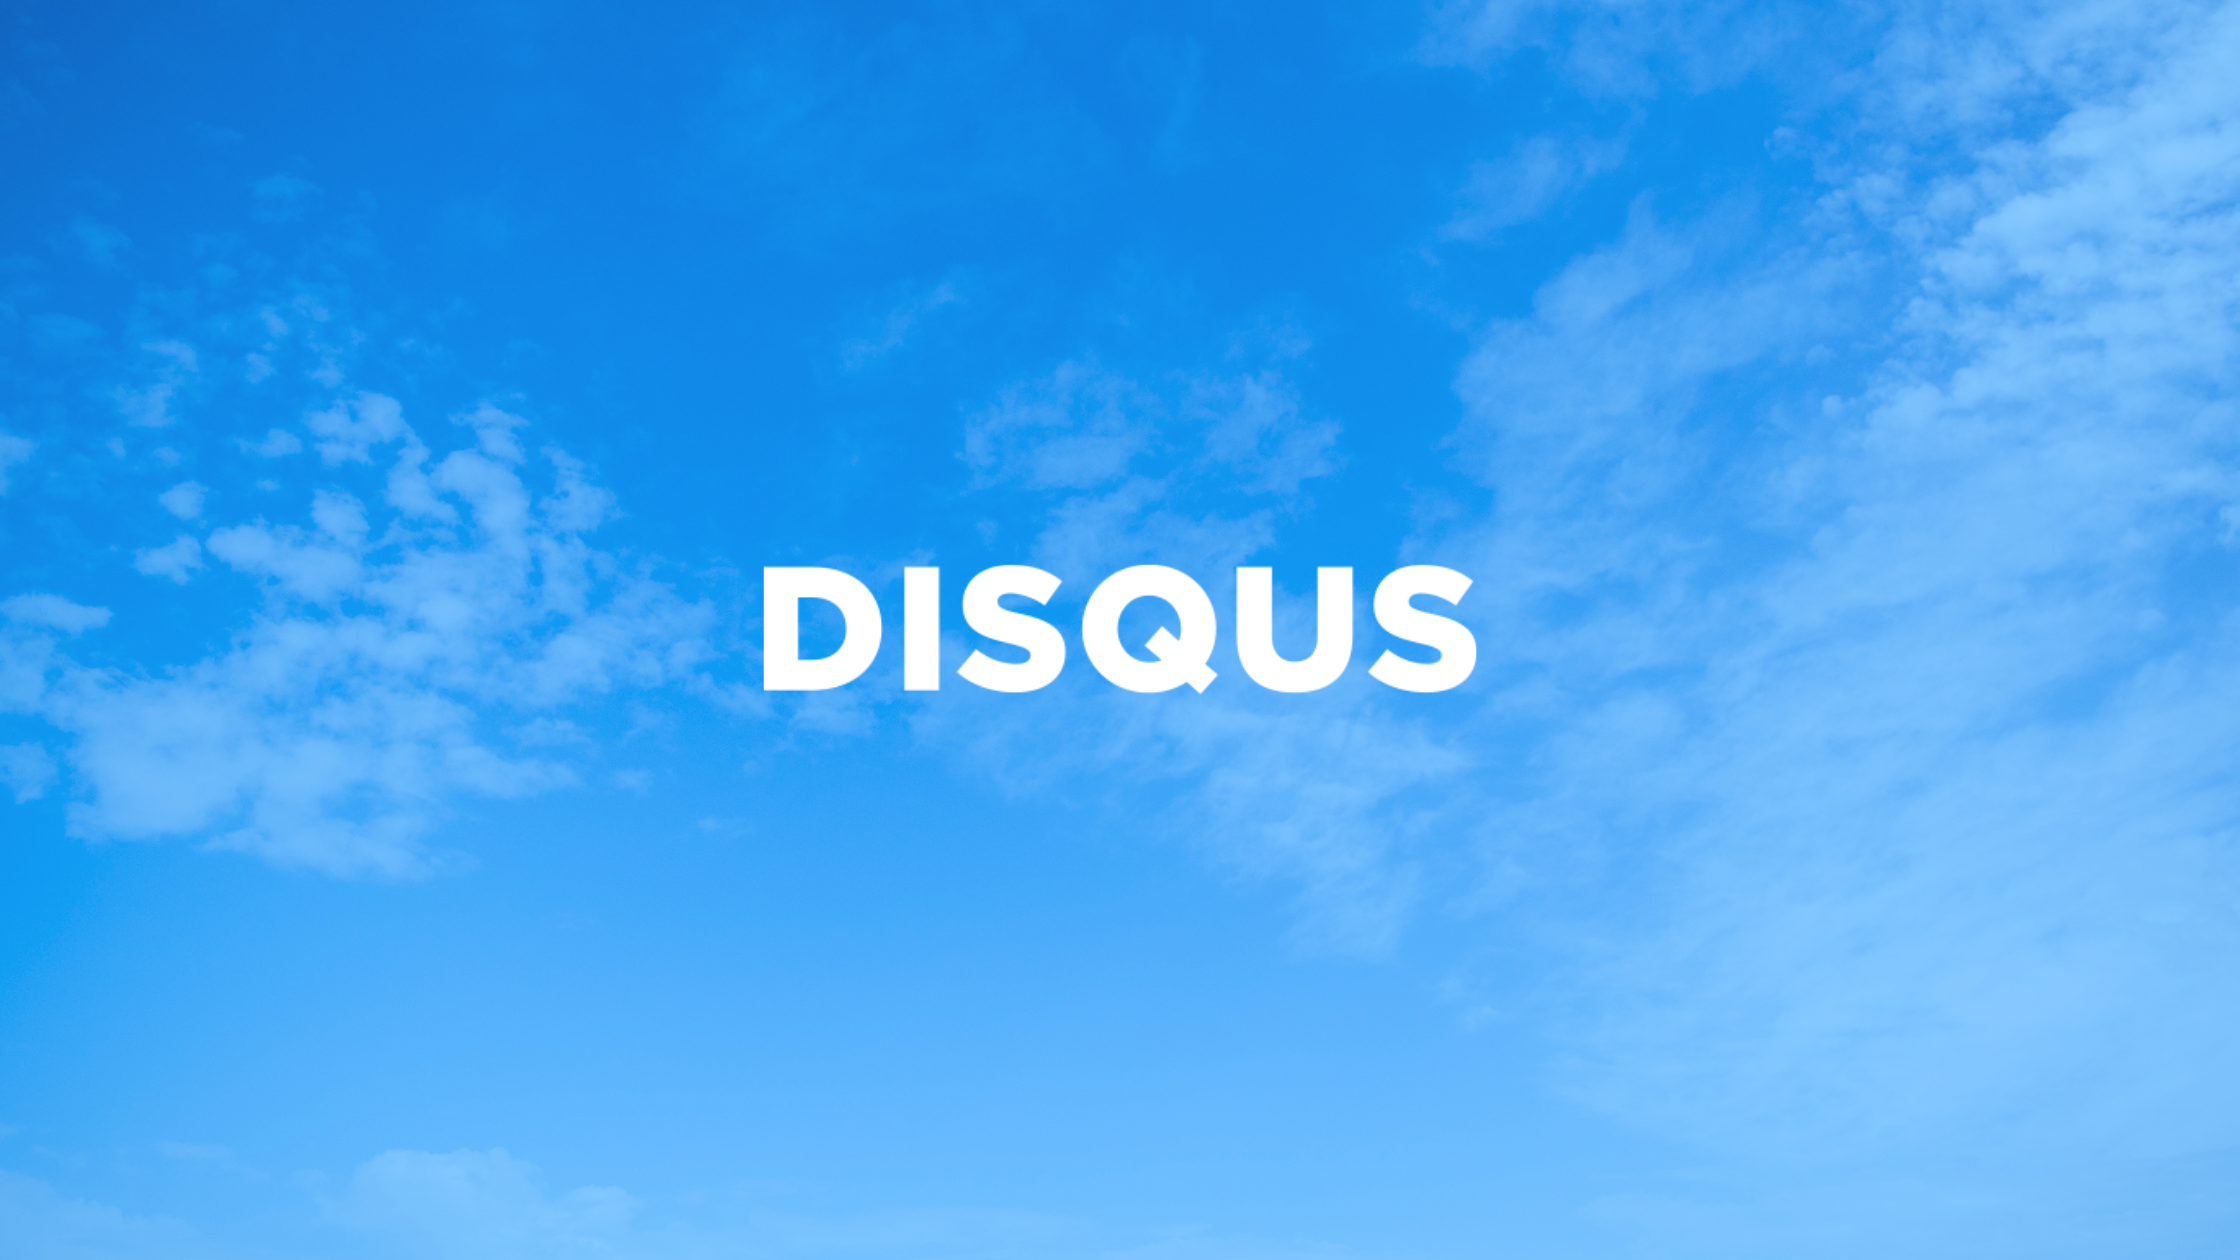 Let's talk about the Disqus redesign